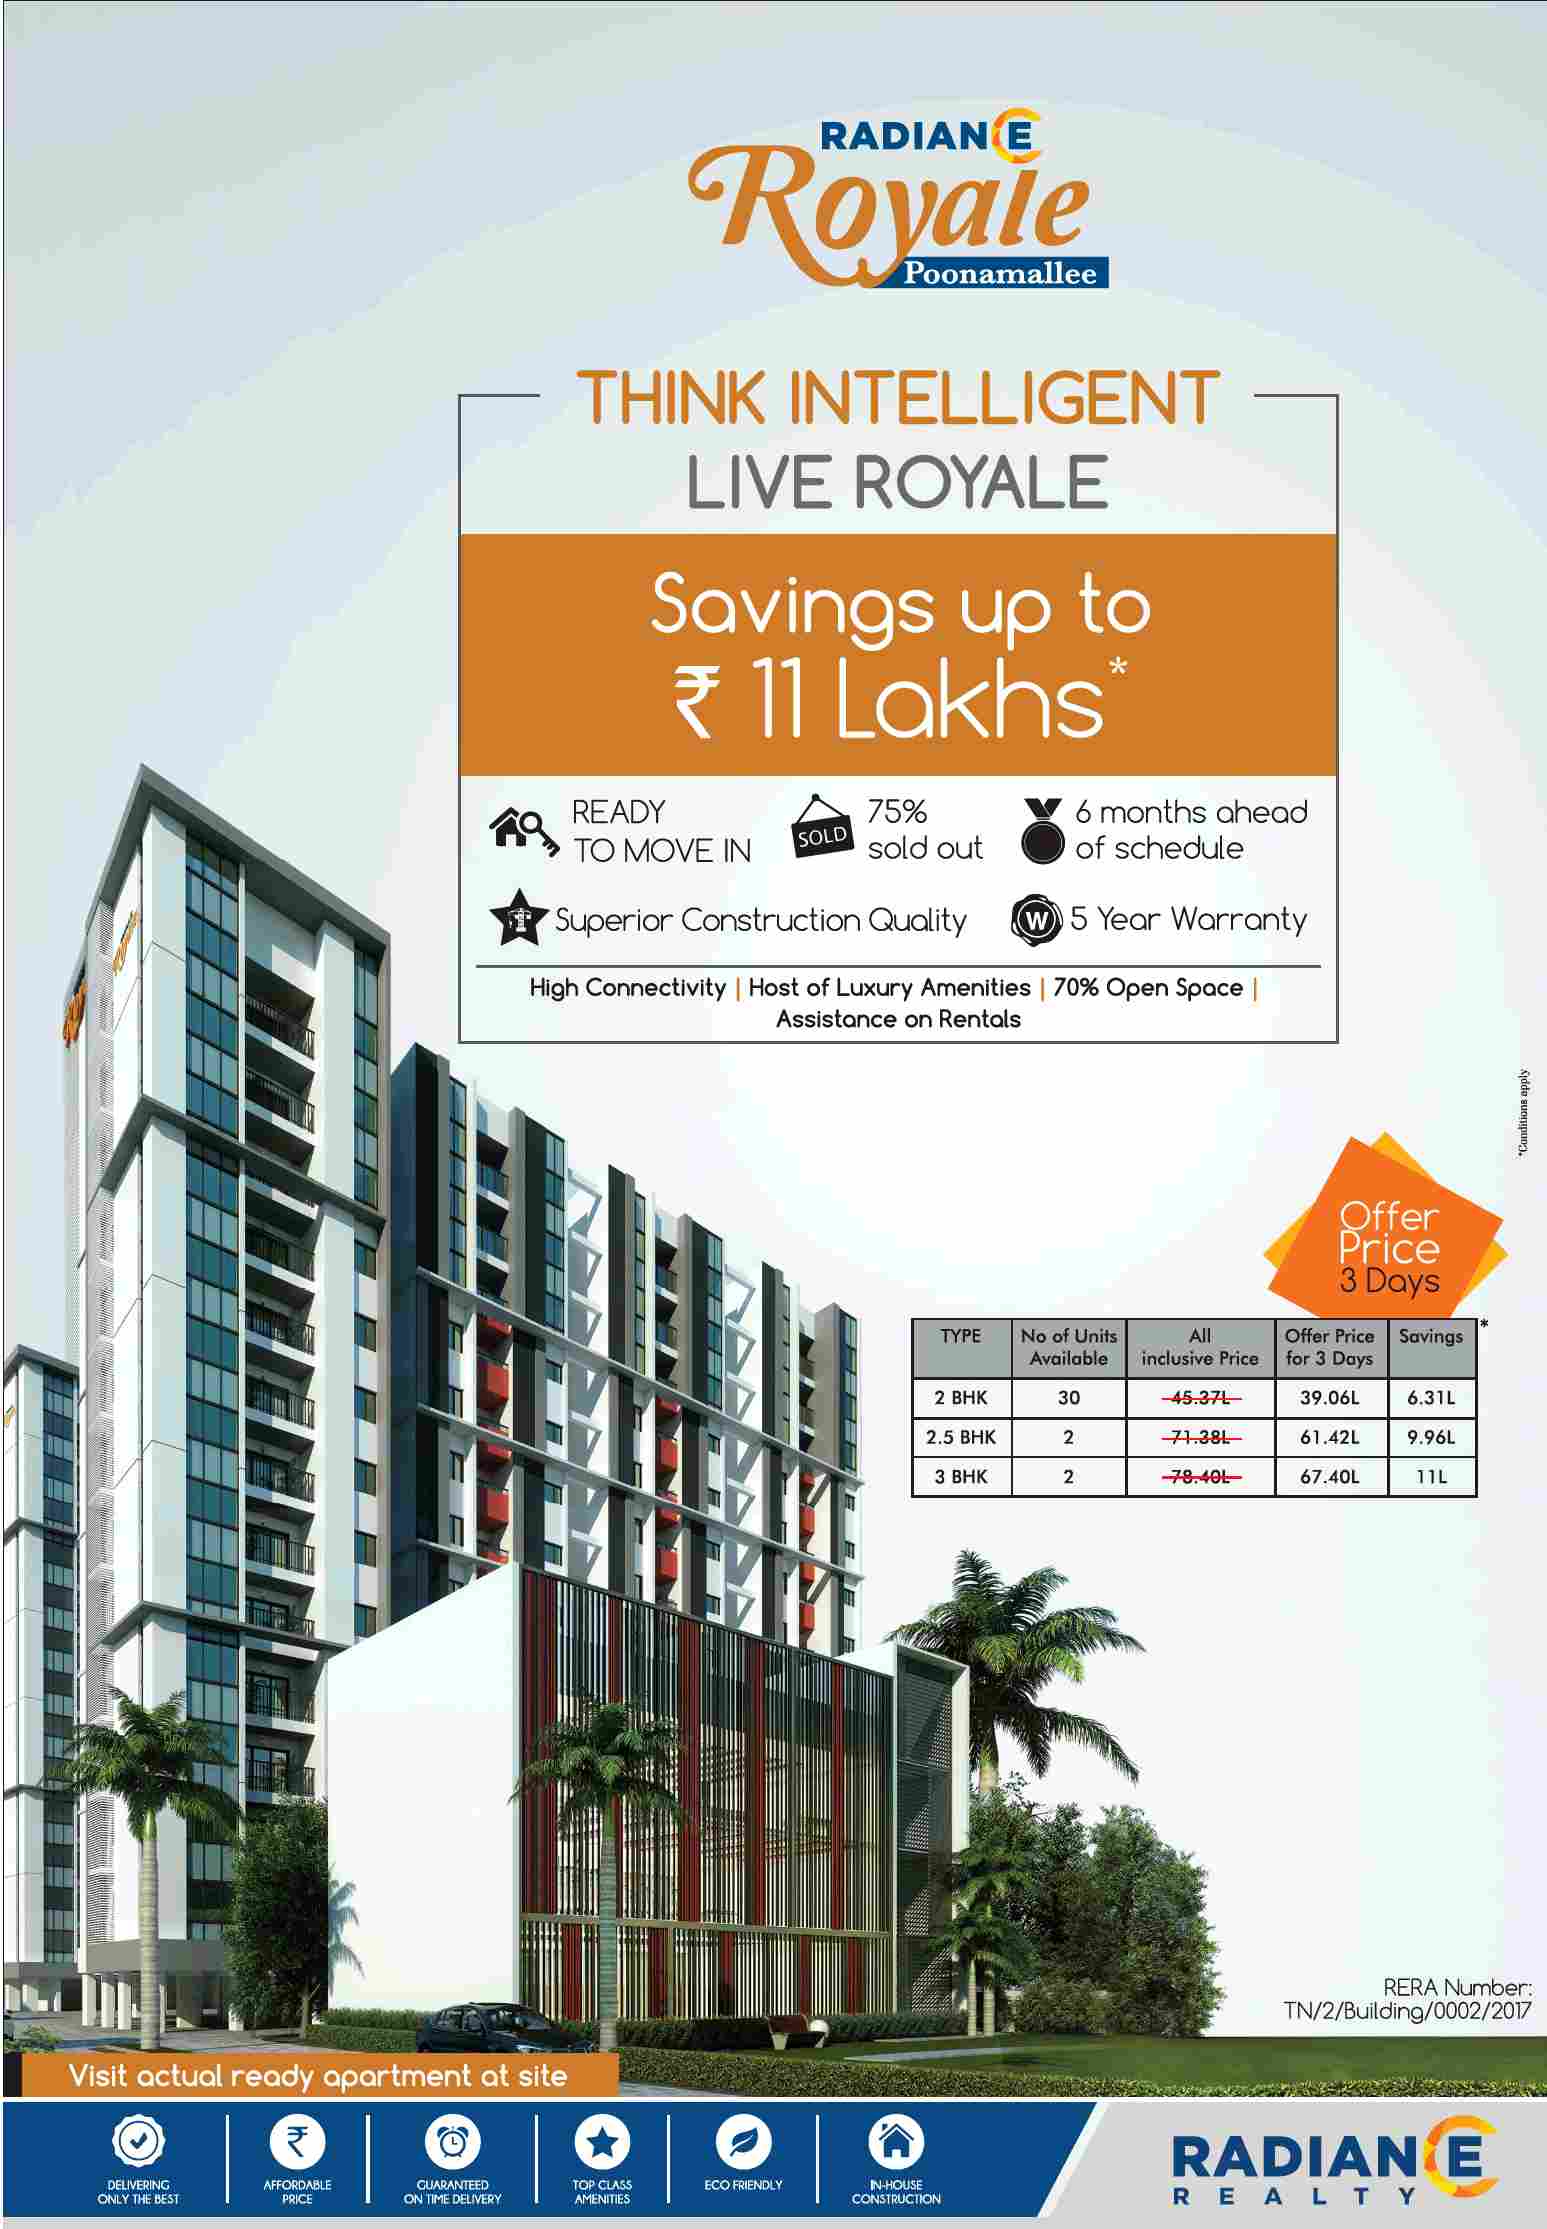 Book home and save up to Rs. 11 Lakhs at Radiance Royale in Chennai Update